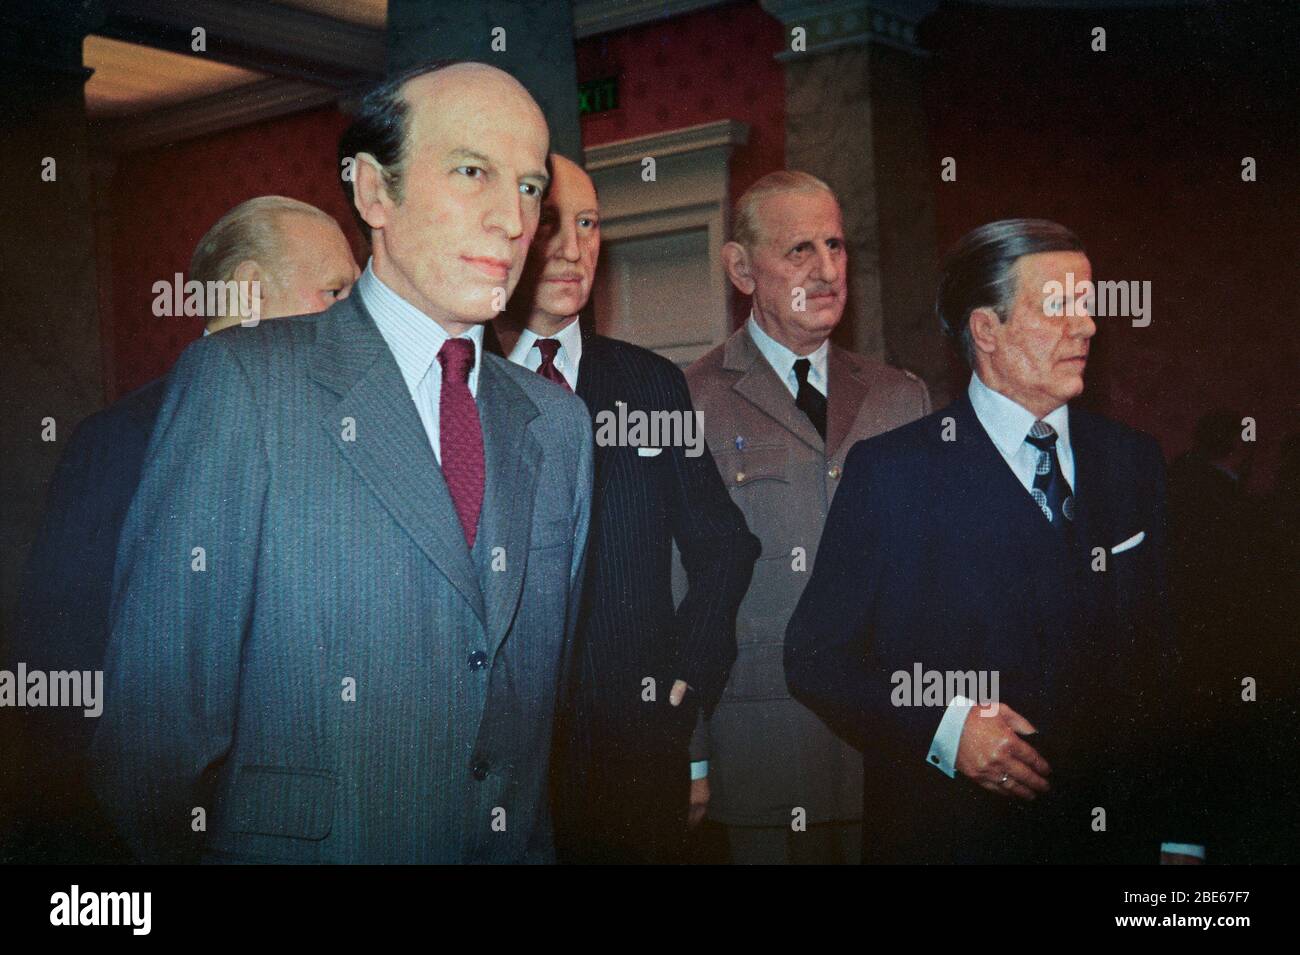 wax figures of European statesmen (Valéry Giscard d´Estaing front left, Helmut Schmidt on the right), April 1979, Madame Tussauds, London, England, Great Britain Stock Photo